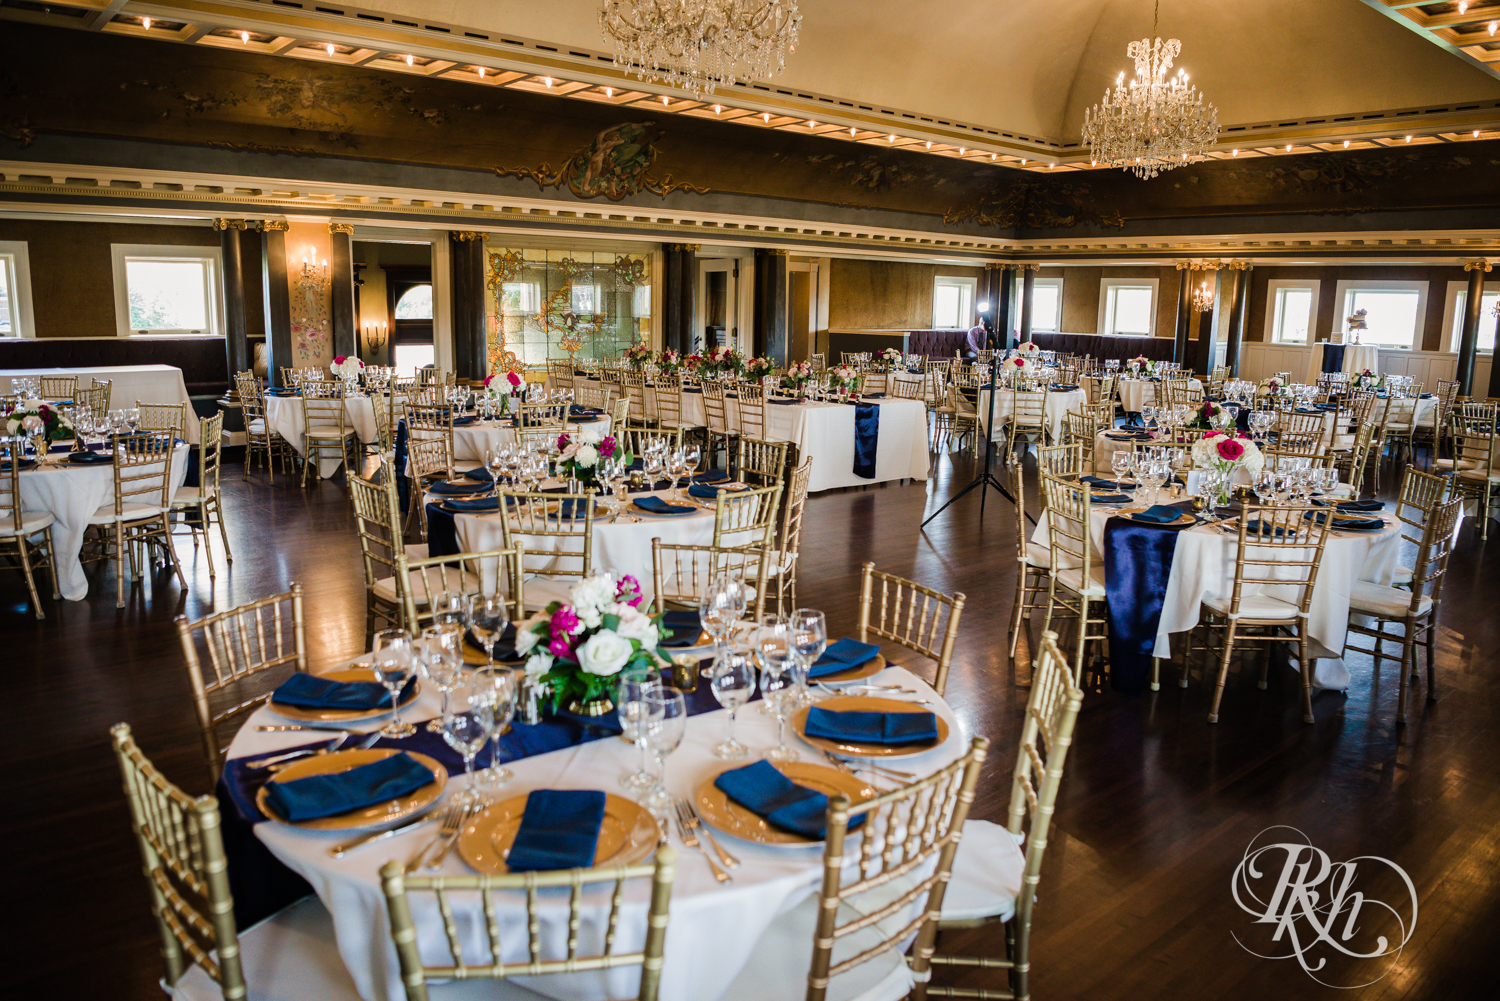 Indoor wedding reception setup at the Semple Mansion in Minneapolis, Minnesota.